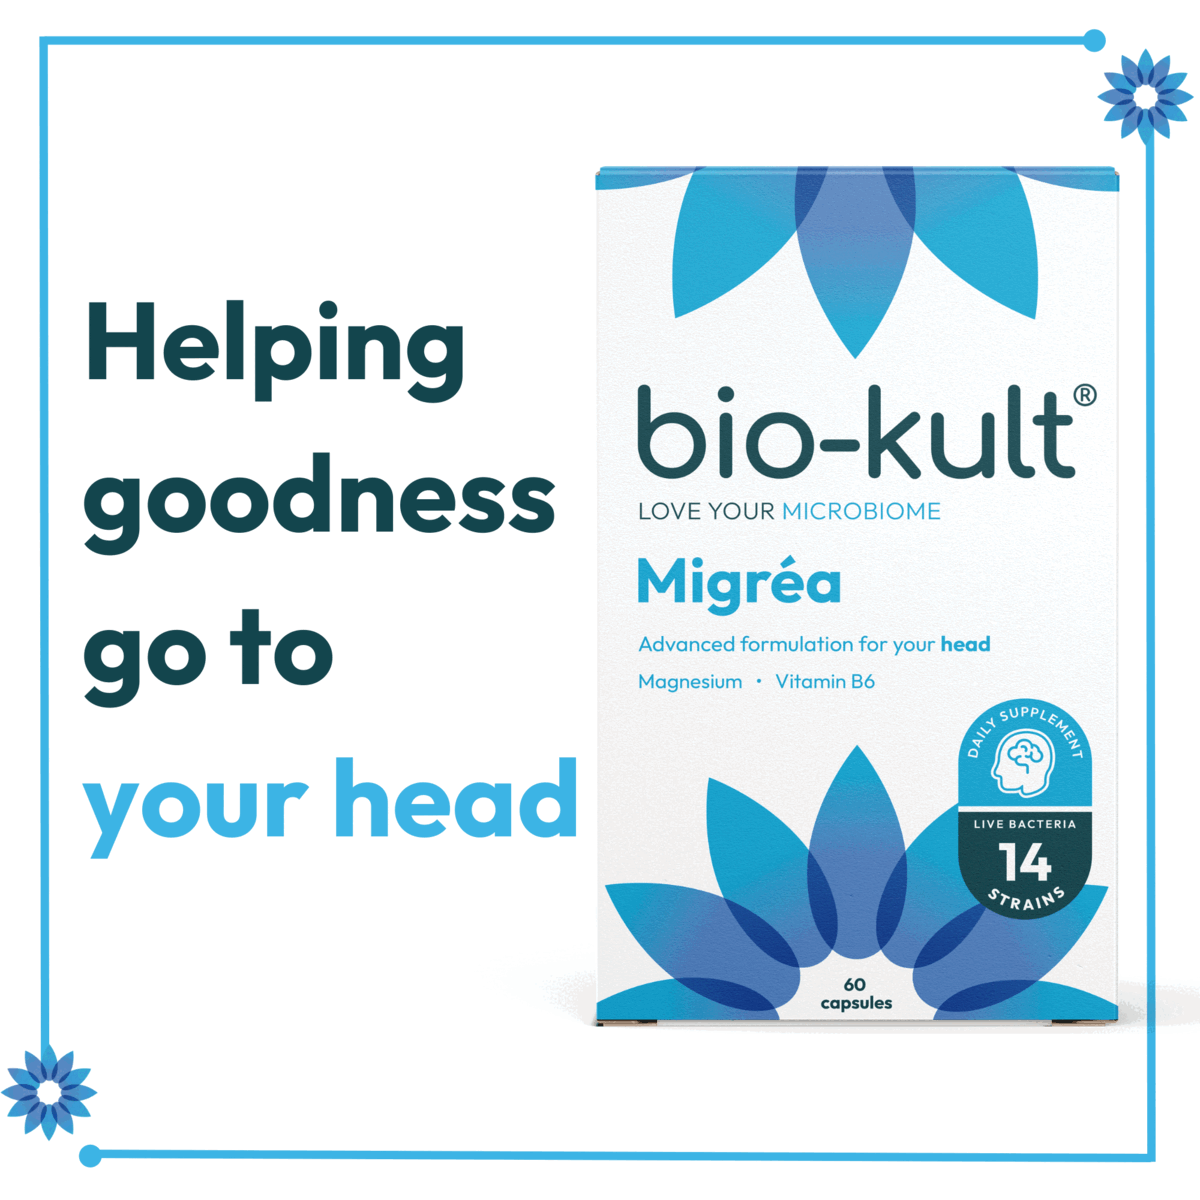 Helping goodness go to your head, the little flower with a whole lot of power, new look some award winning bacteria inside!higly recommended - life saver, fantastic - i just can't believe it, great product, we can't hold in our exictment!